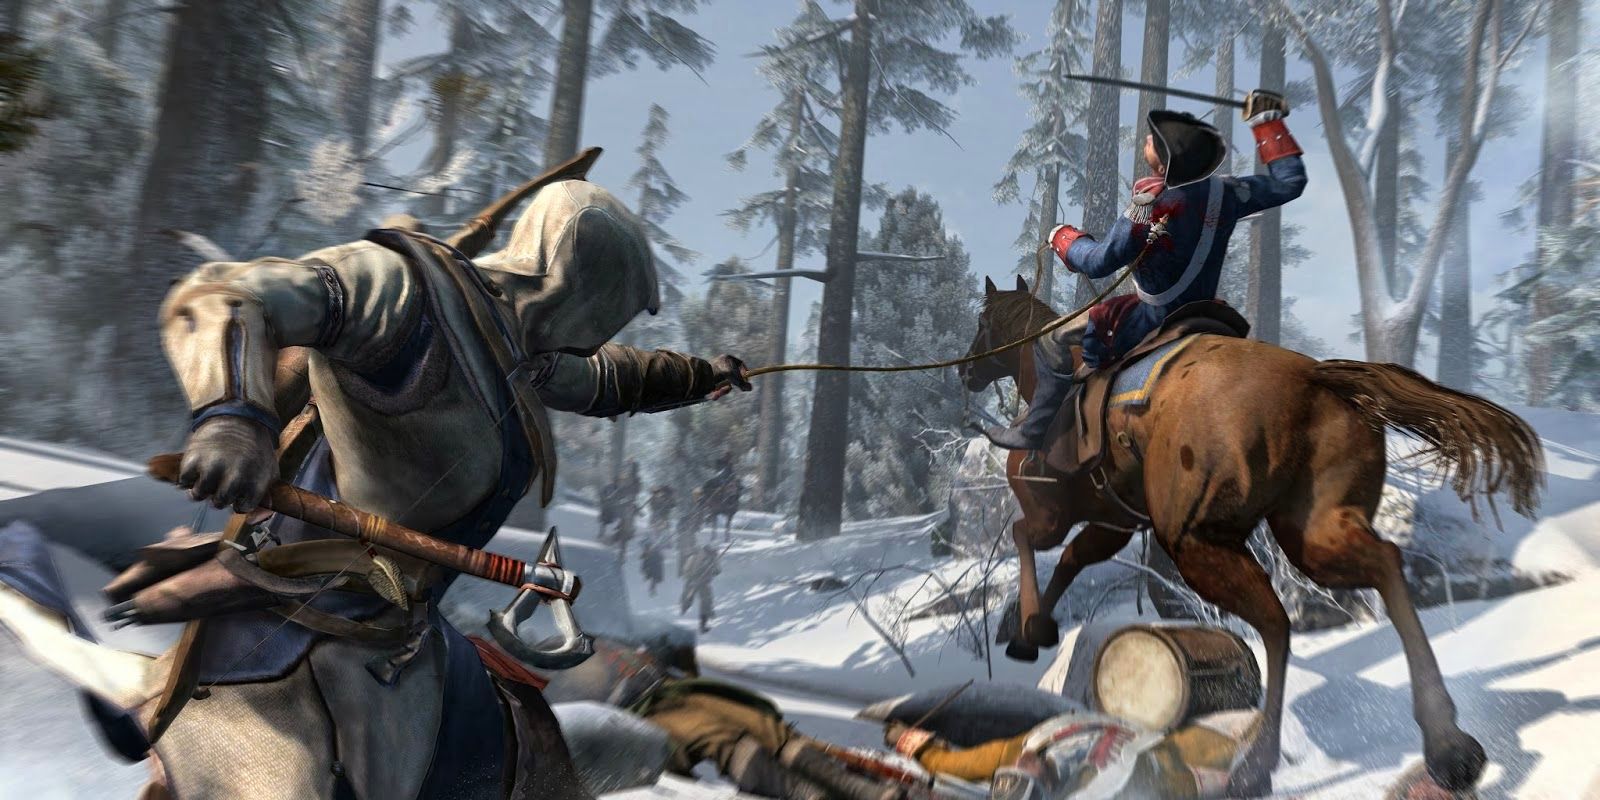 Connor hooking an enemy on horseback with the Rope Dart tool in Assassin's Creed 3.